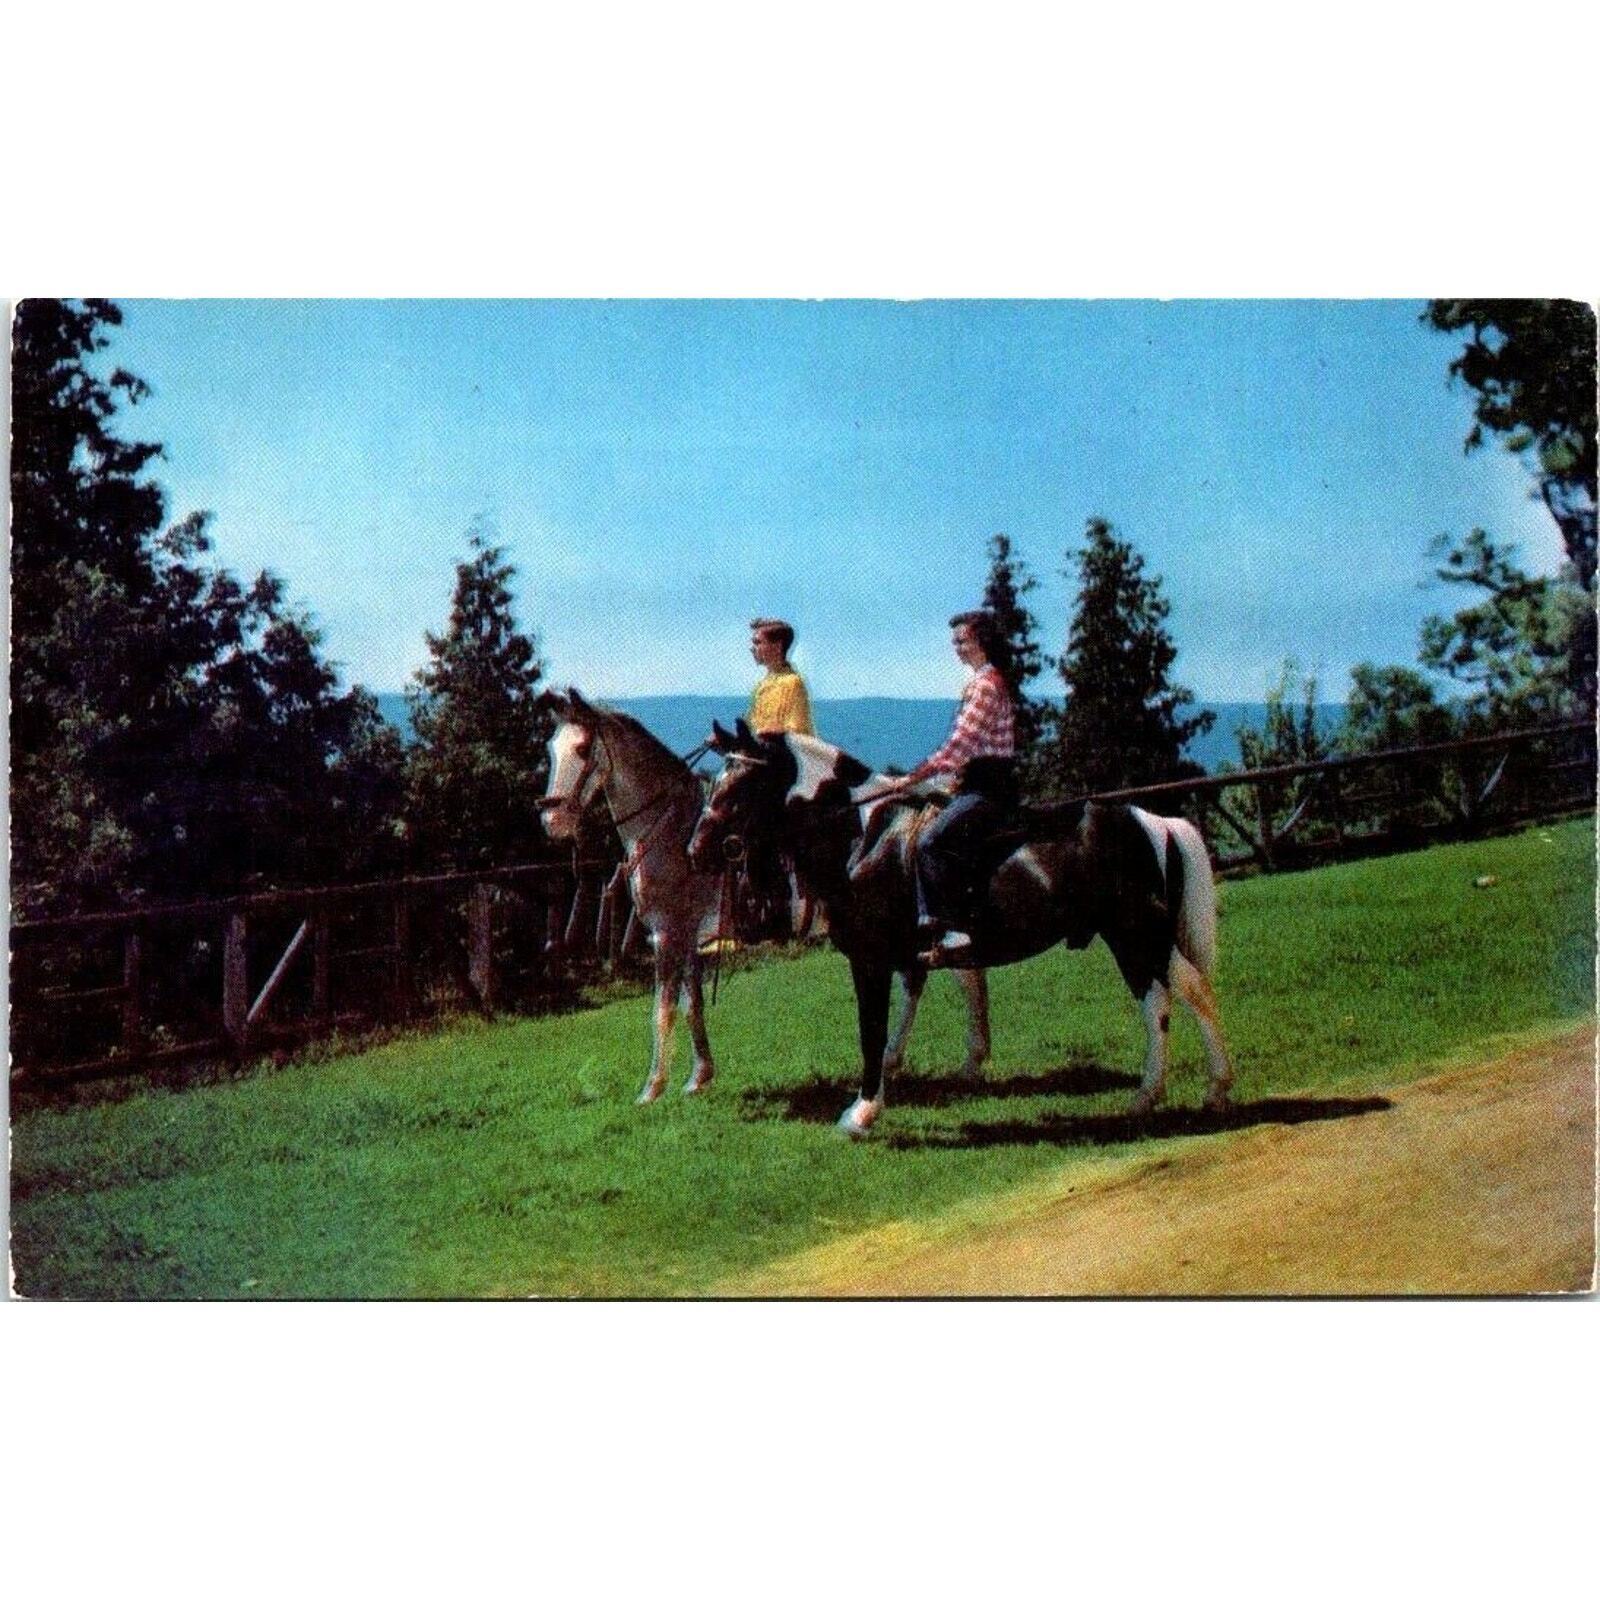 Two People Riding Horses 1952 Vintage Postcard By Nycechrome Man And Woman